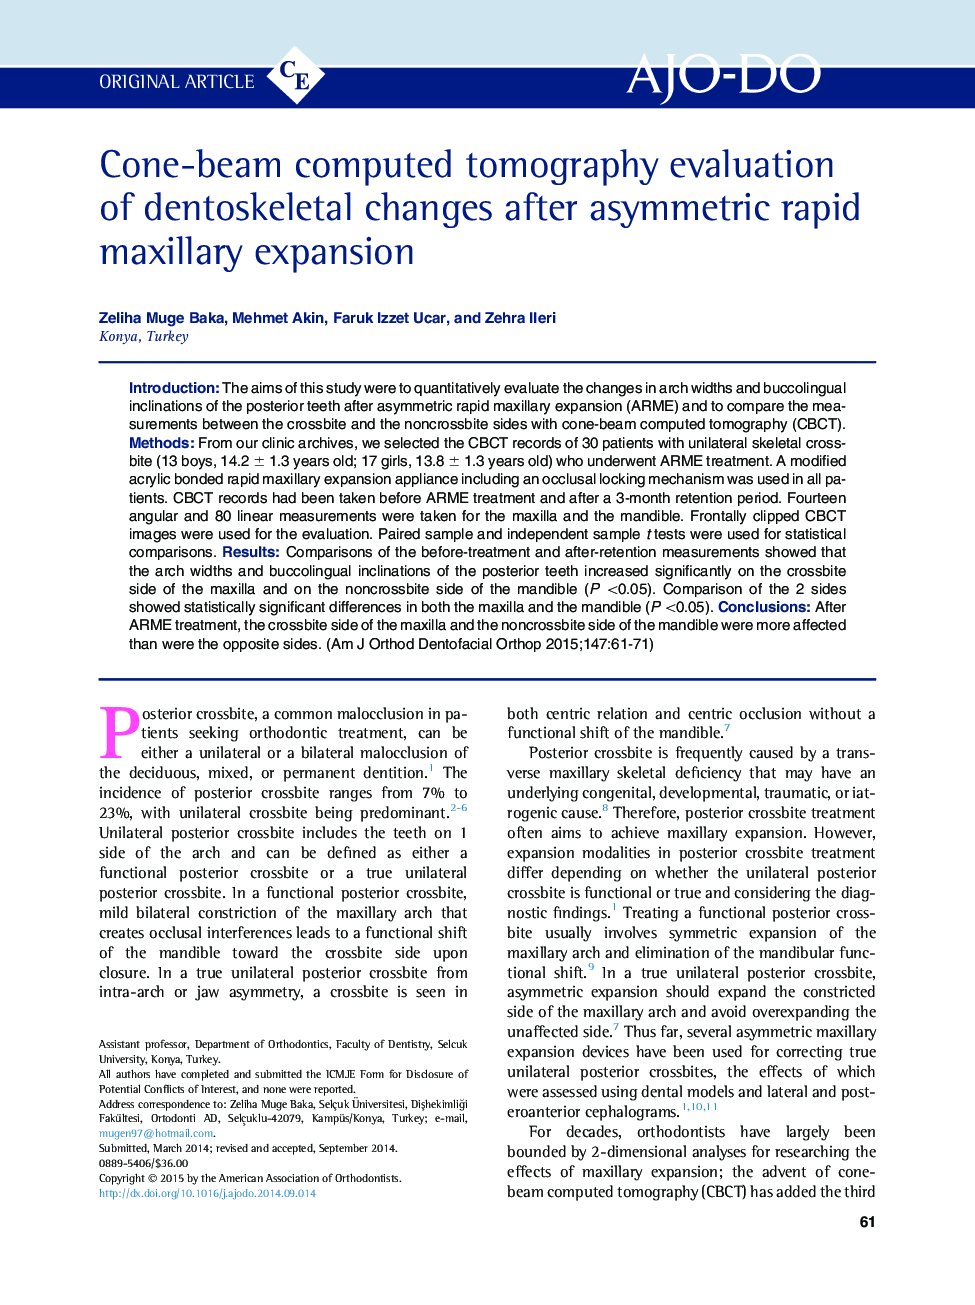 Cone-beam computed tomography evaluation of dentoskeletal changes after asymmetric rapid maxillary expansion 